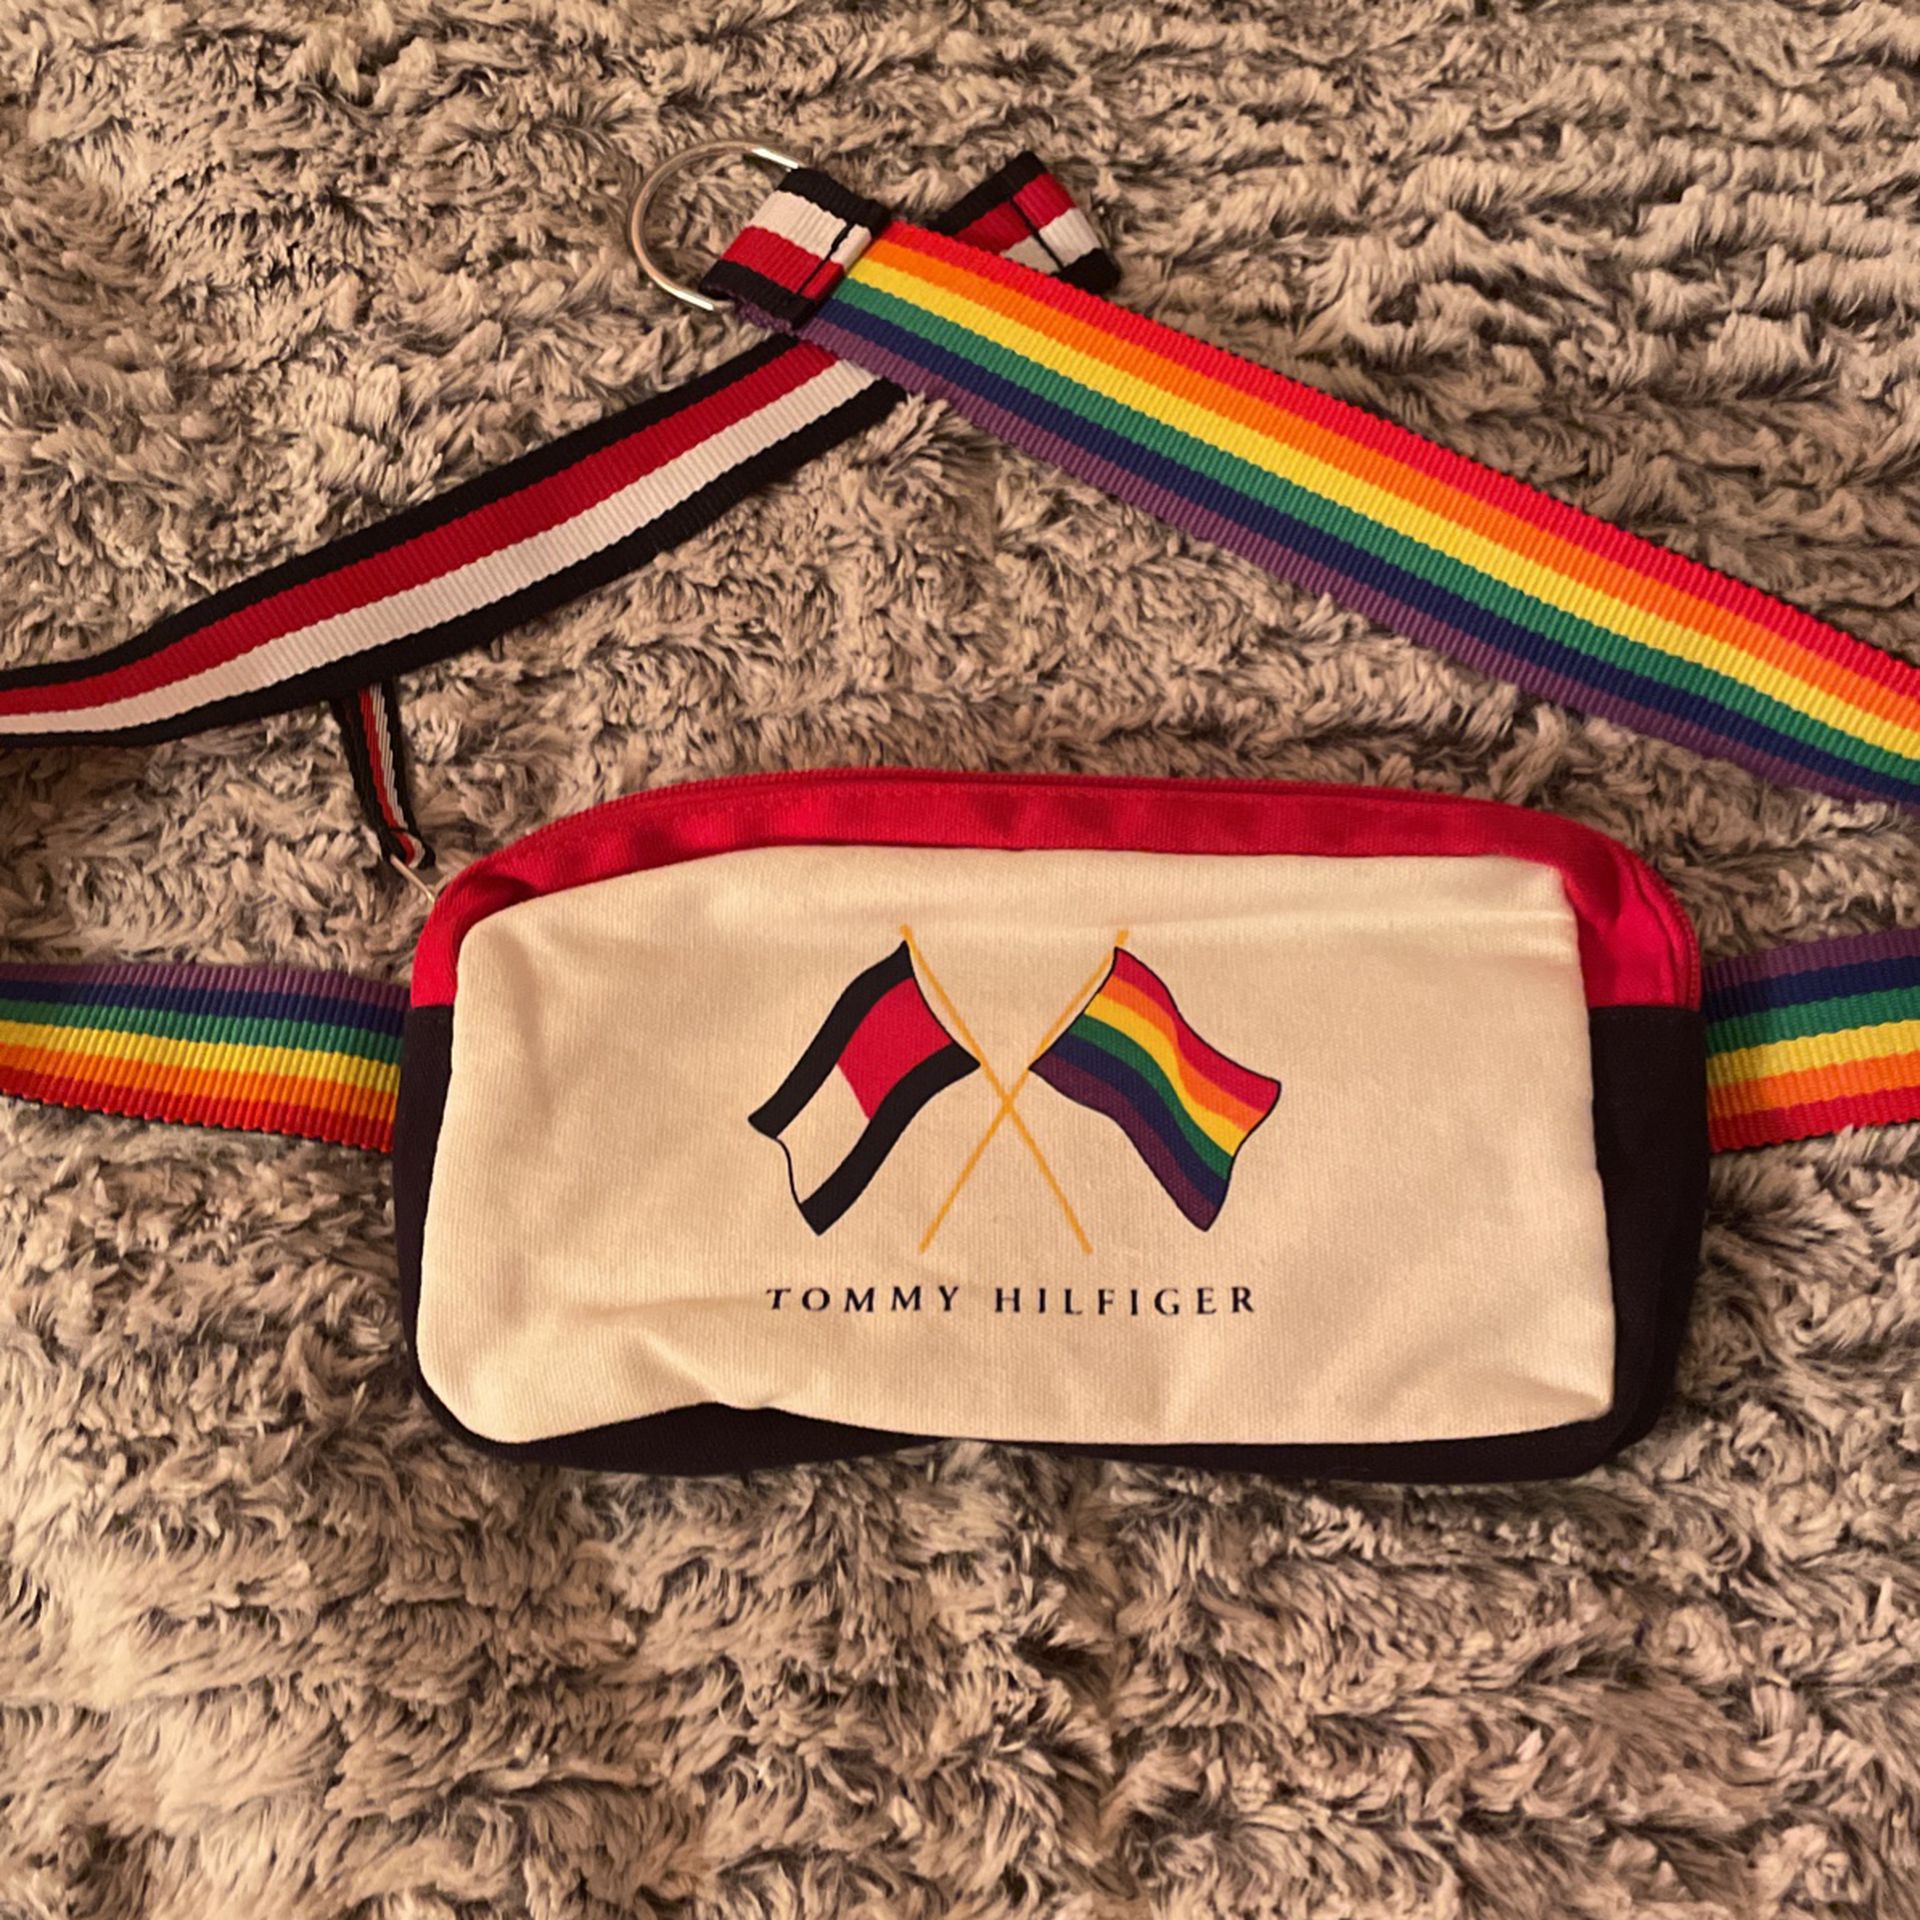 Like New Tommy Hilfiger Fanny Pack